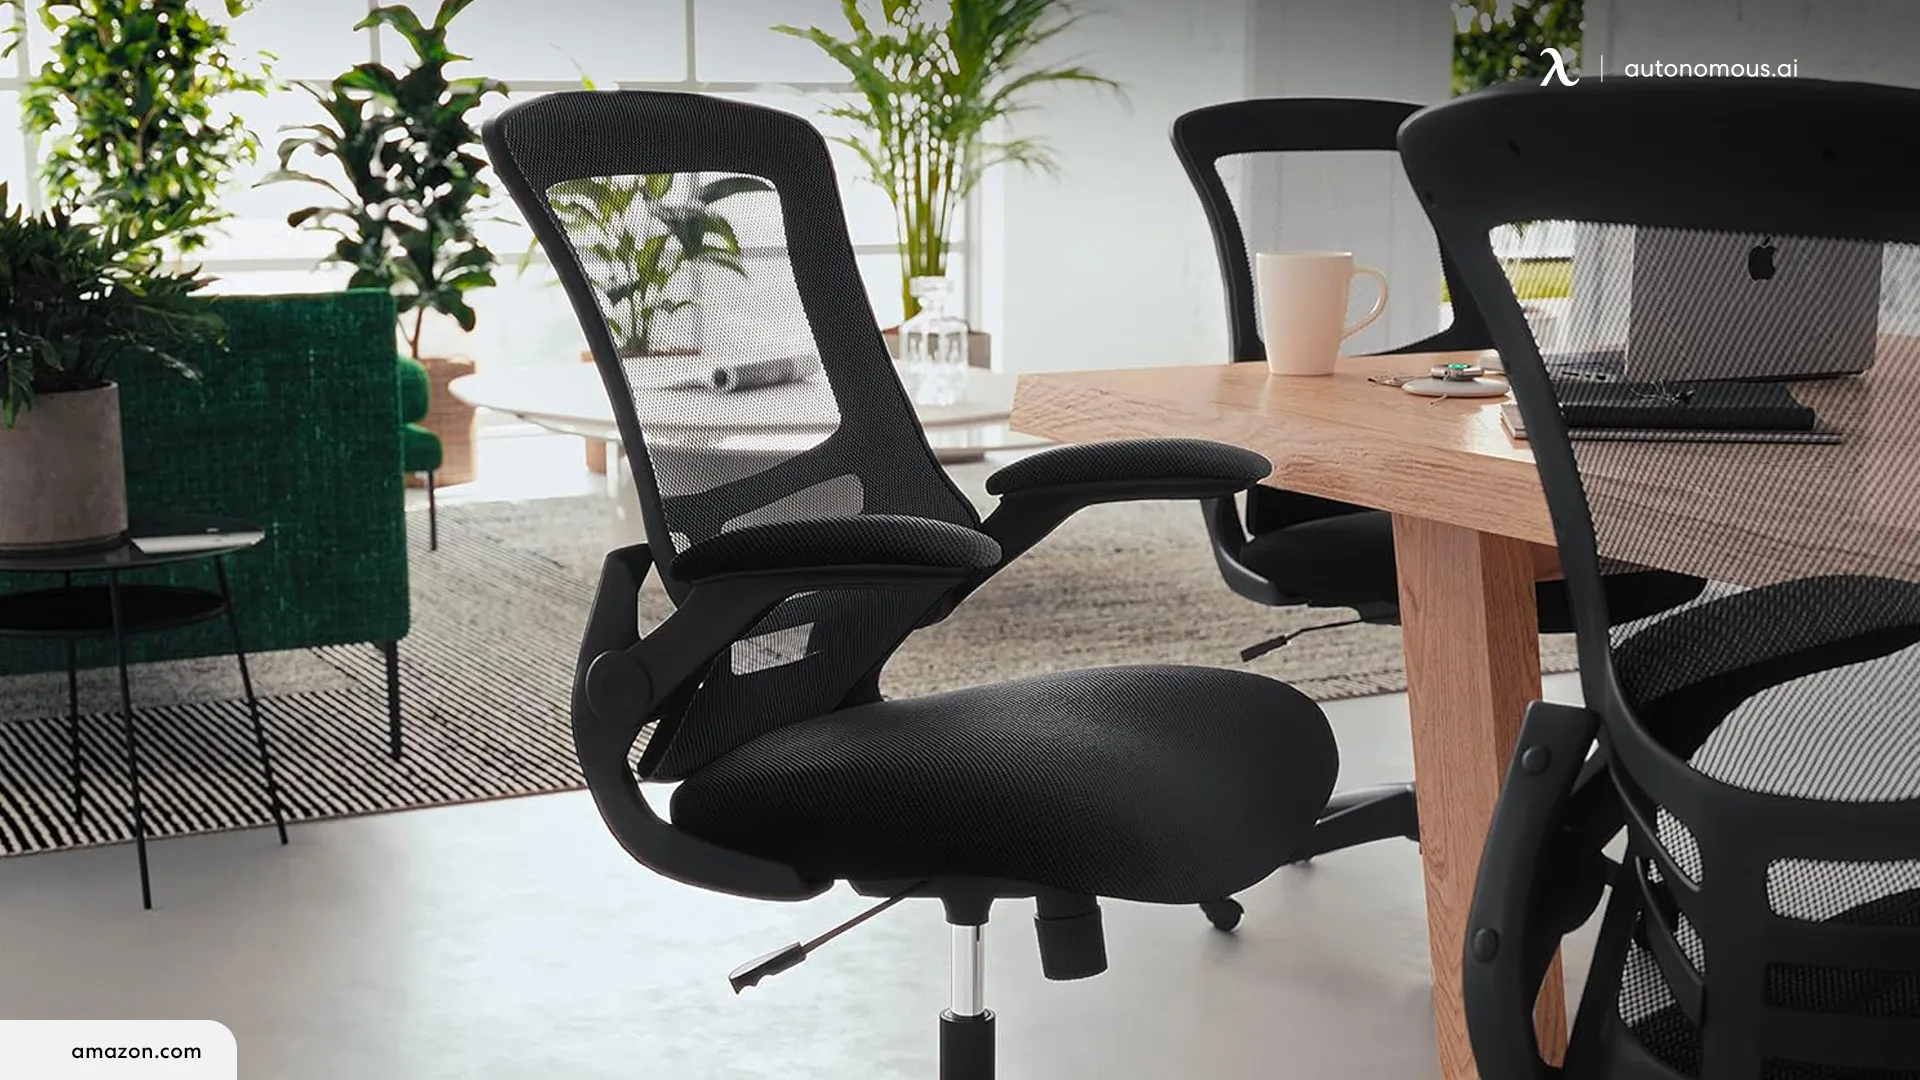 5 Best Budget Office Chairs With Quality for Home Office